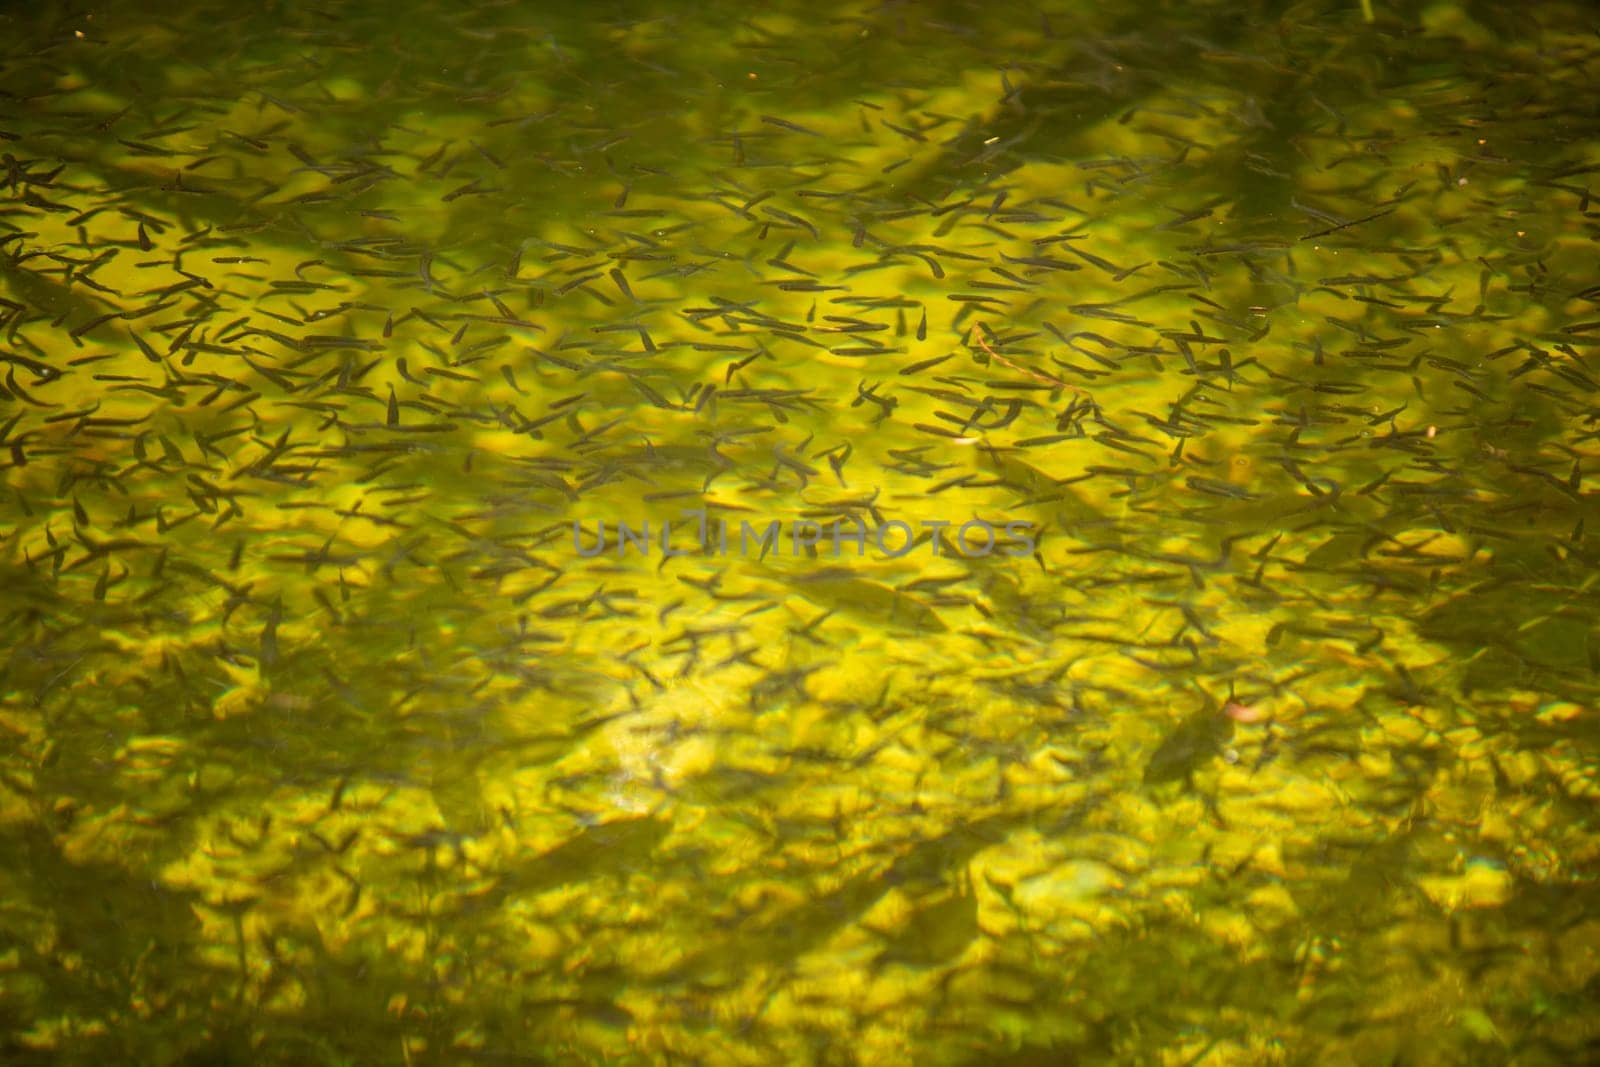 Various Schools of Fish in the everglades